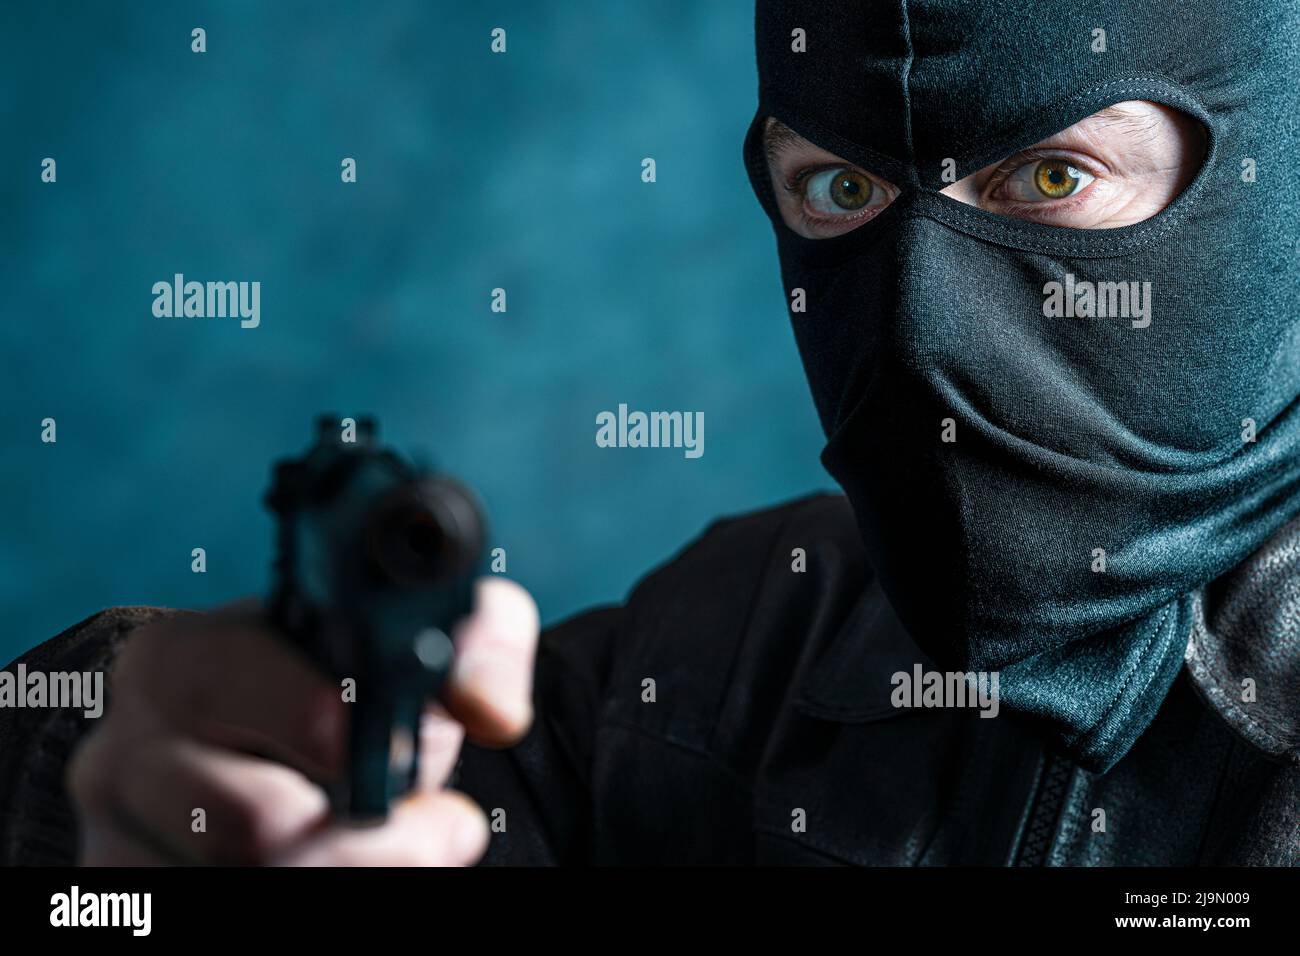 portrait of a thief with balaclava and gun. crime concept Stock Photo